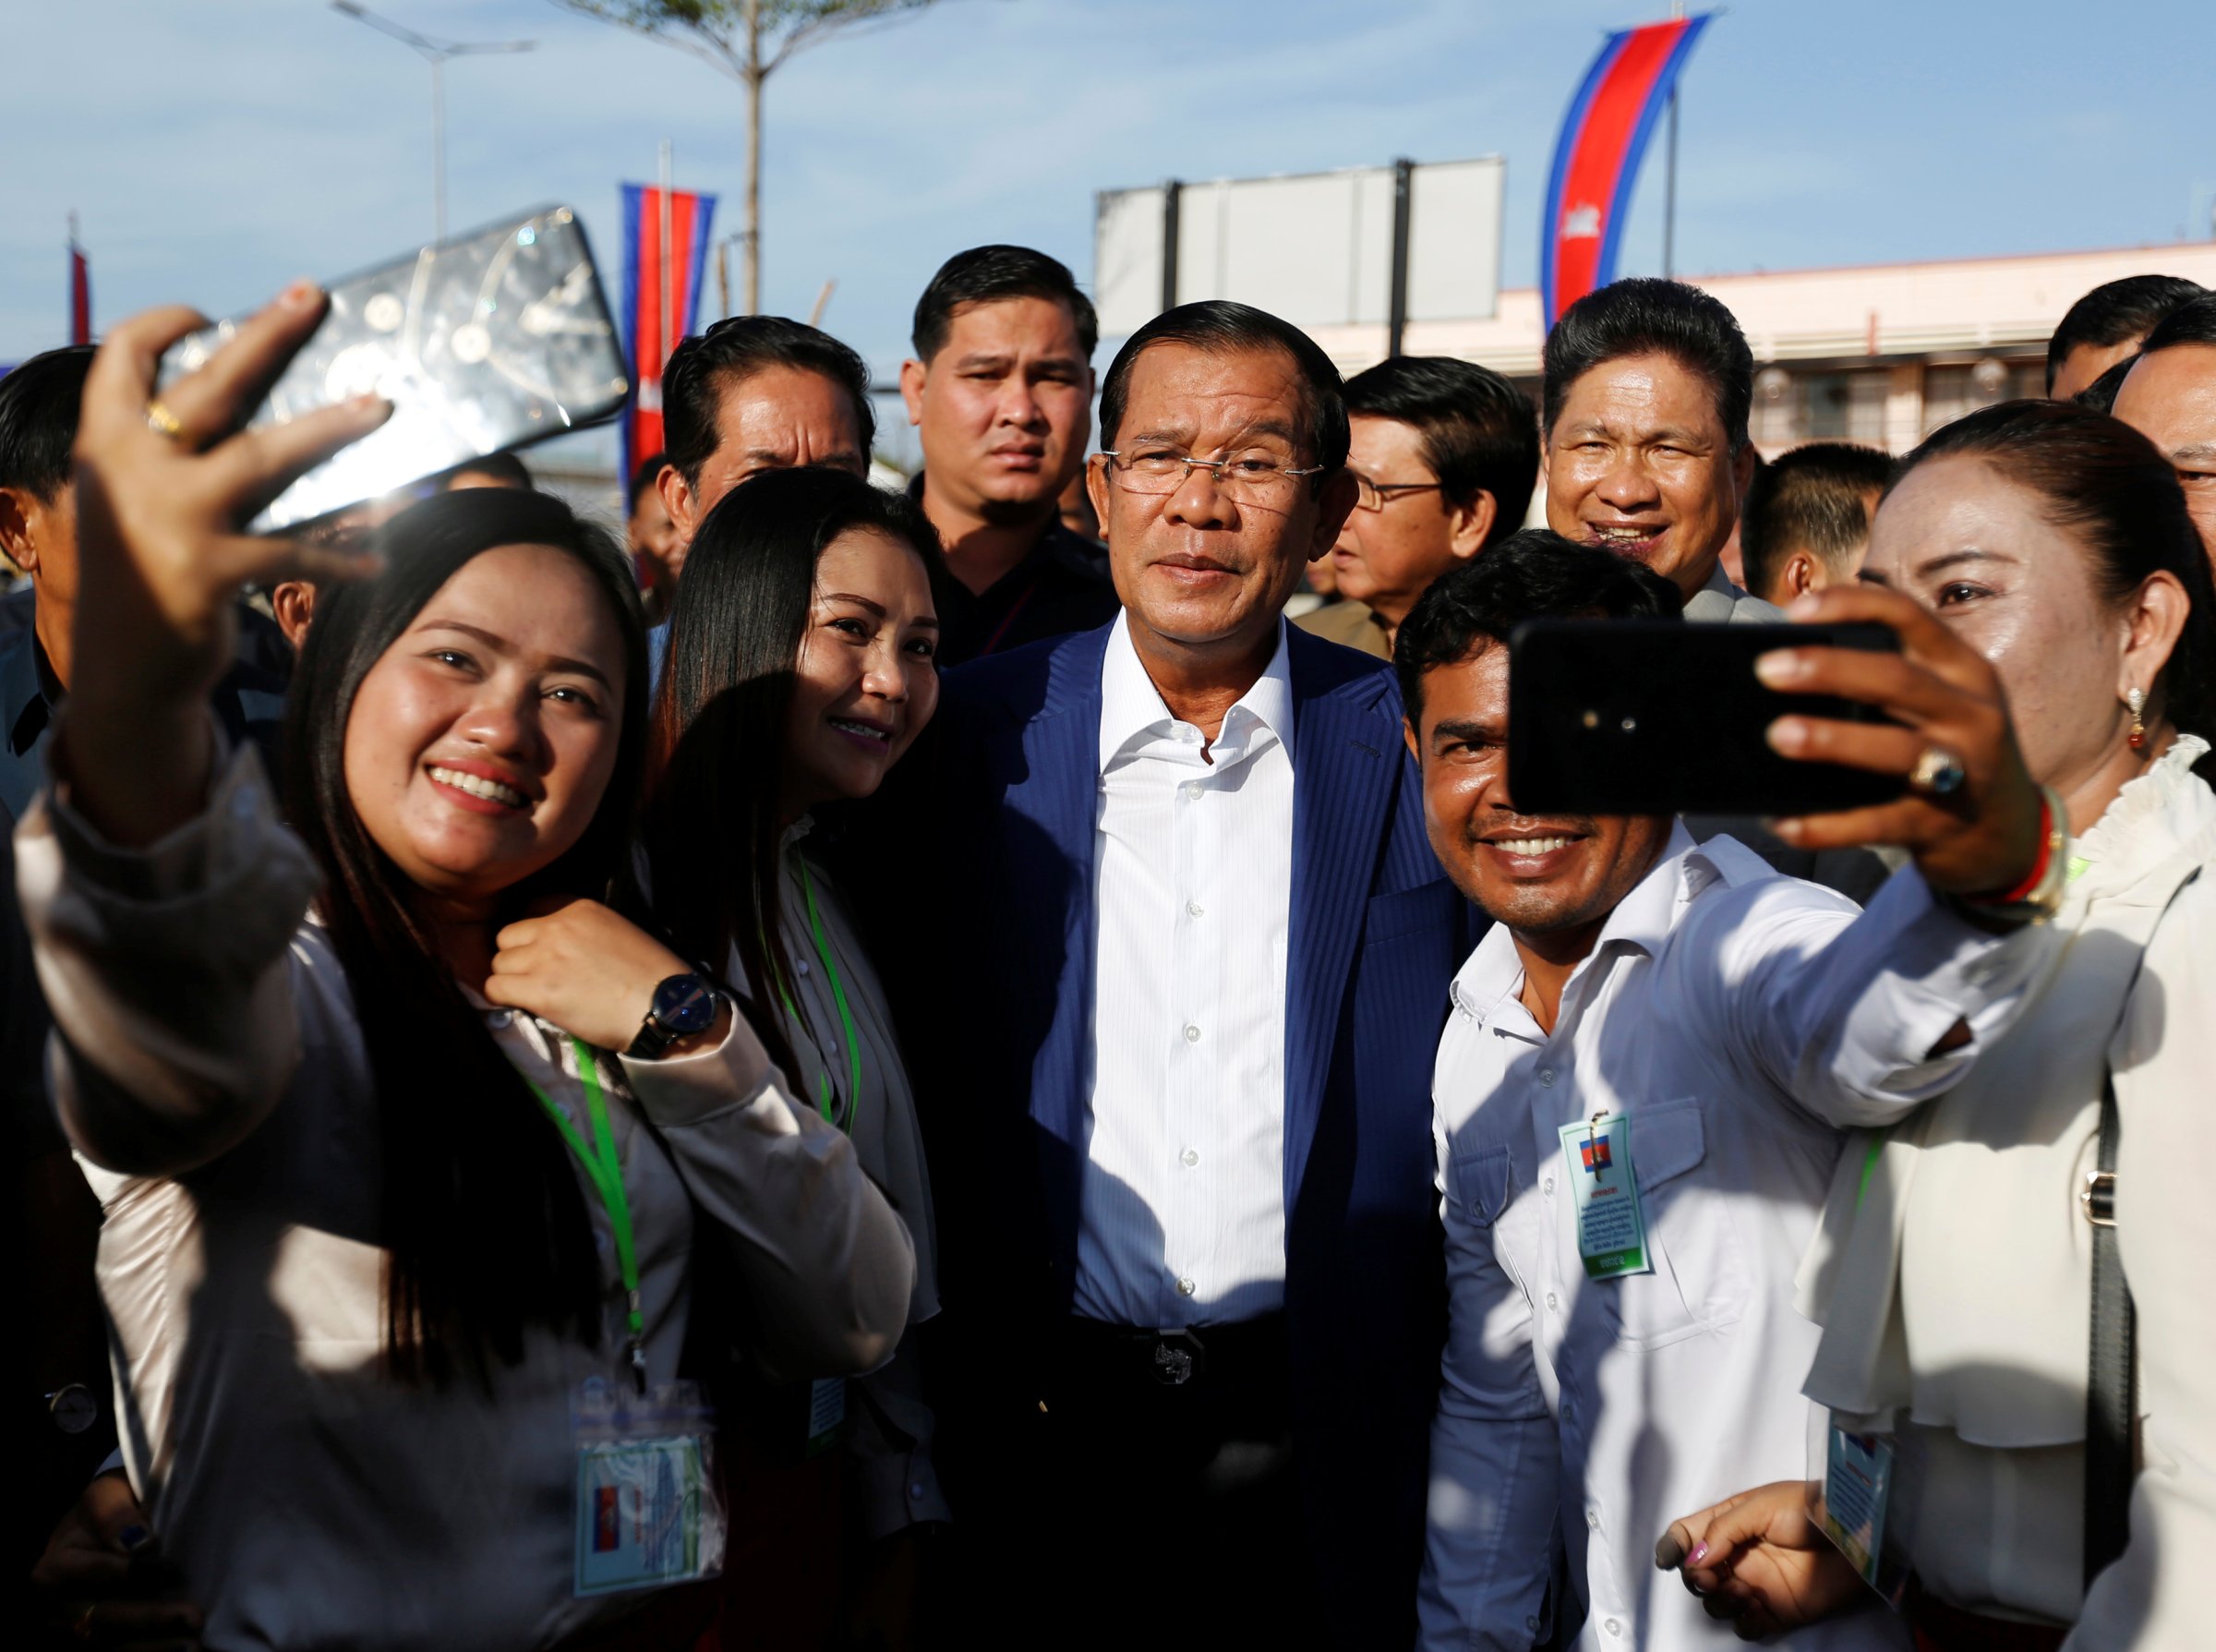 Supporters take pictures with Cambodia's Prime Minister Hun Sen as he attends an inauguration of a new boat terminal in Phnom Penh